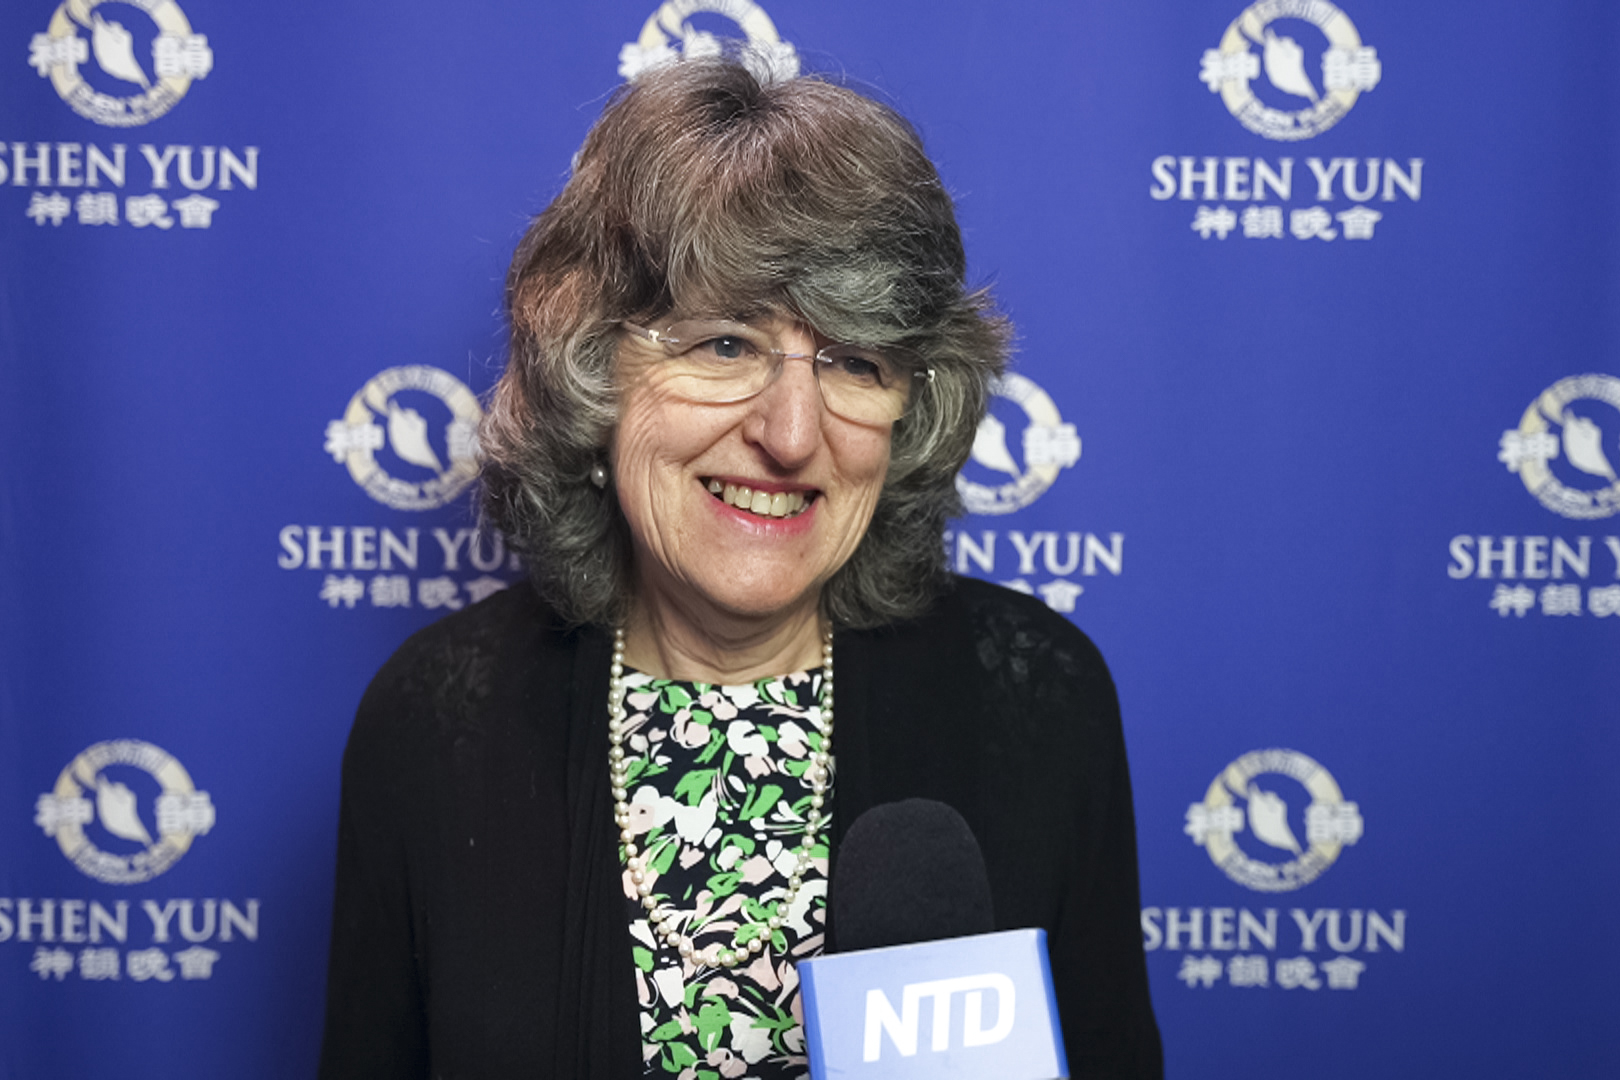 Baroness: Shen Yun ‘Brings Culture to Life in a Very Powerful Way’